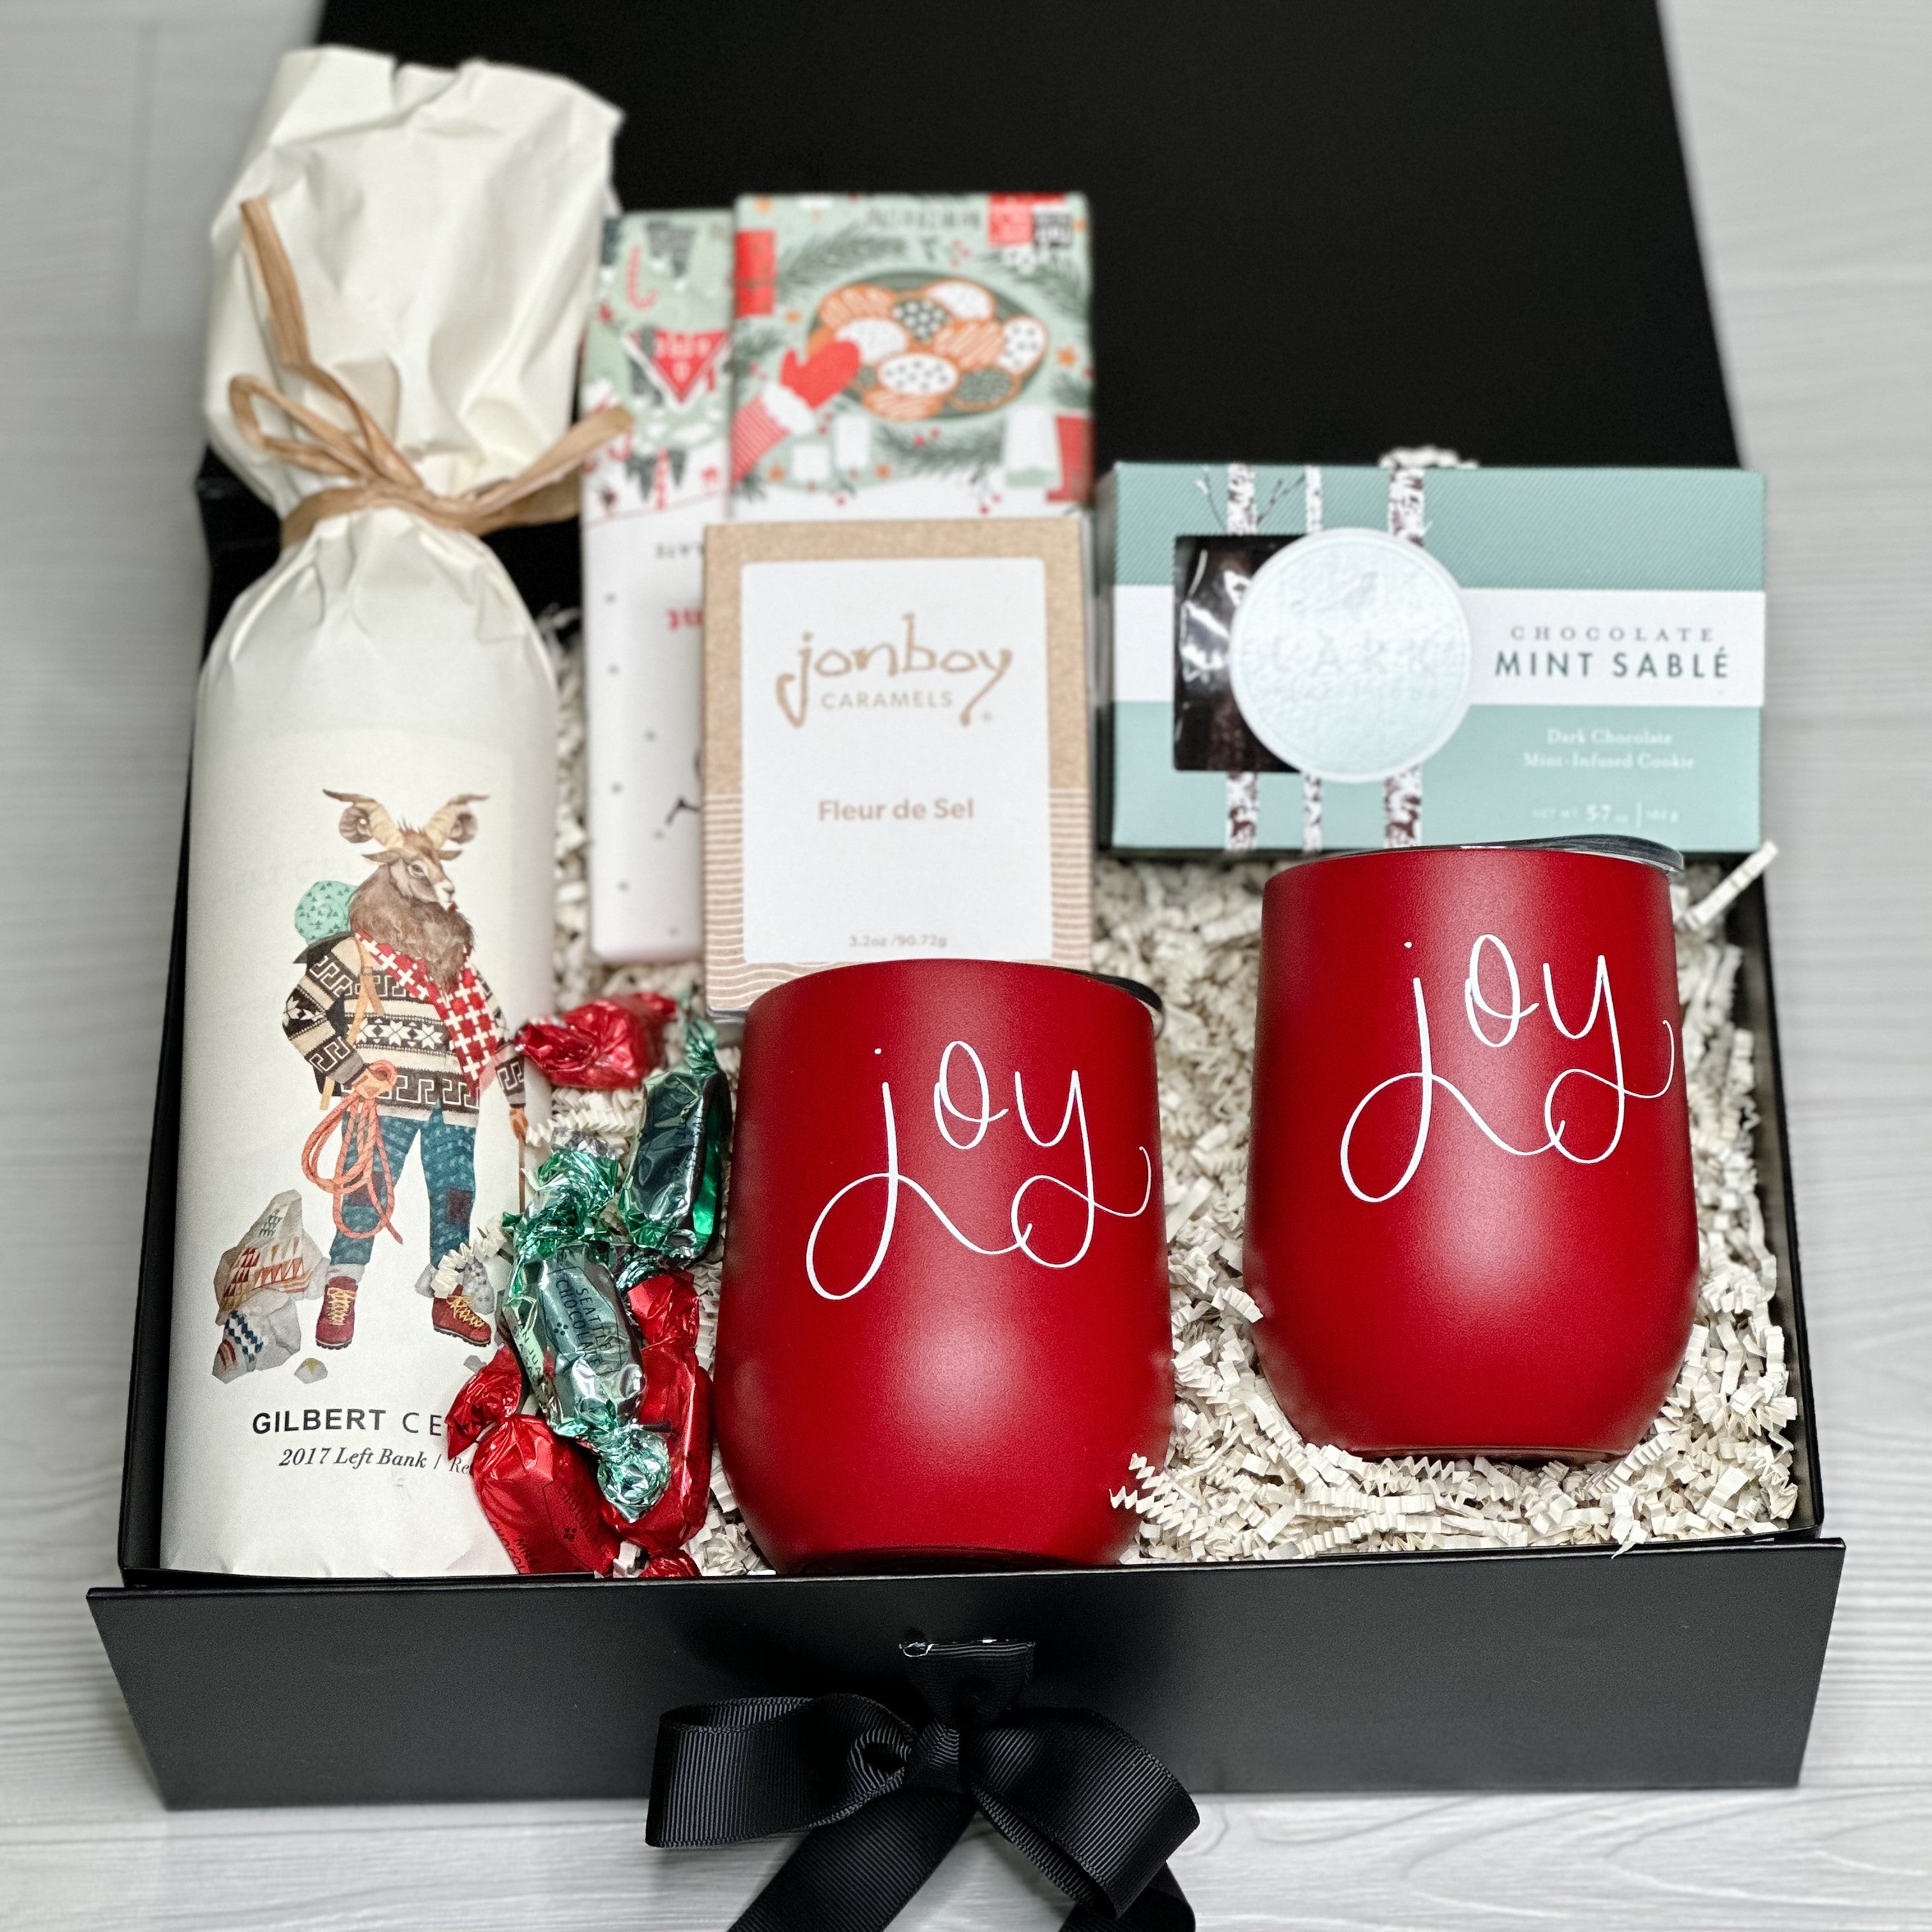 Red wine, chocolate, caramel, cookie and 2 wine tumblers all a part of our eat drink and be joyful gift basket